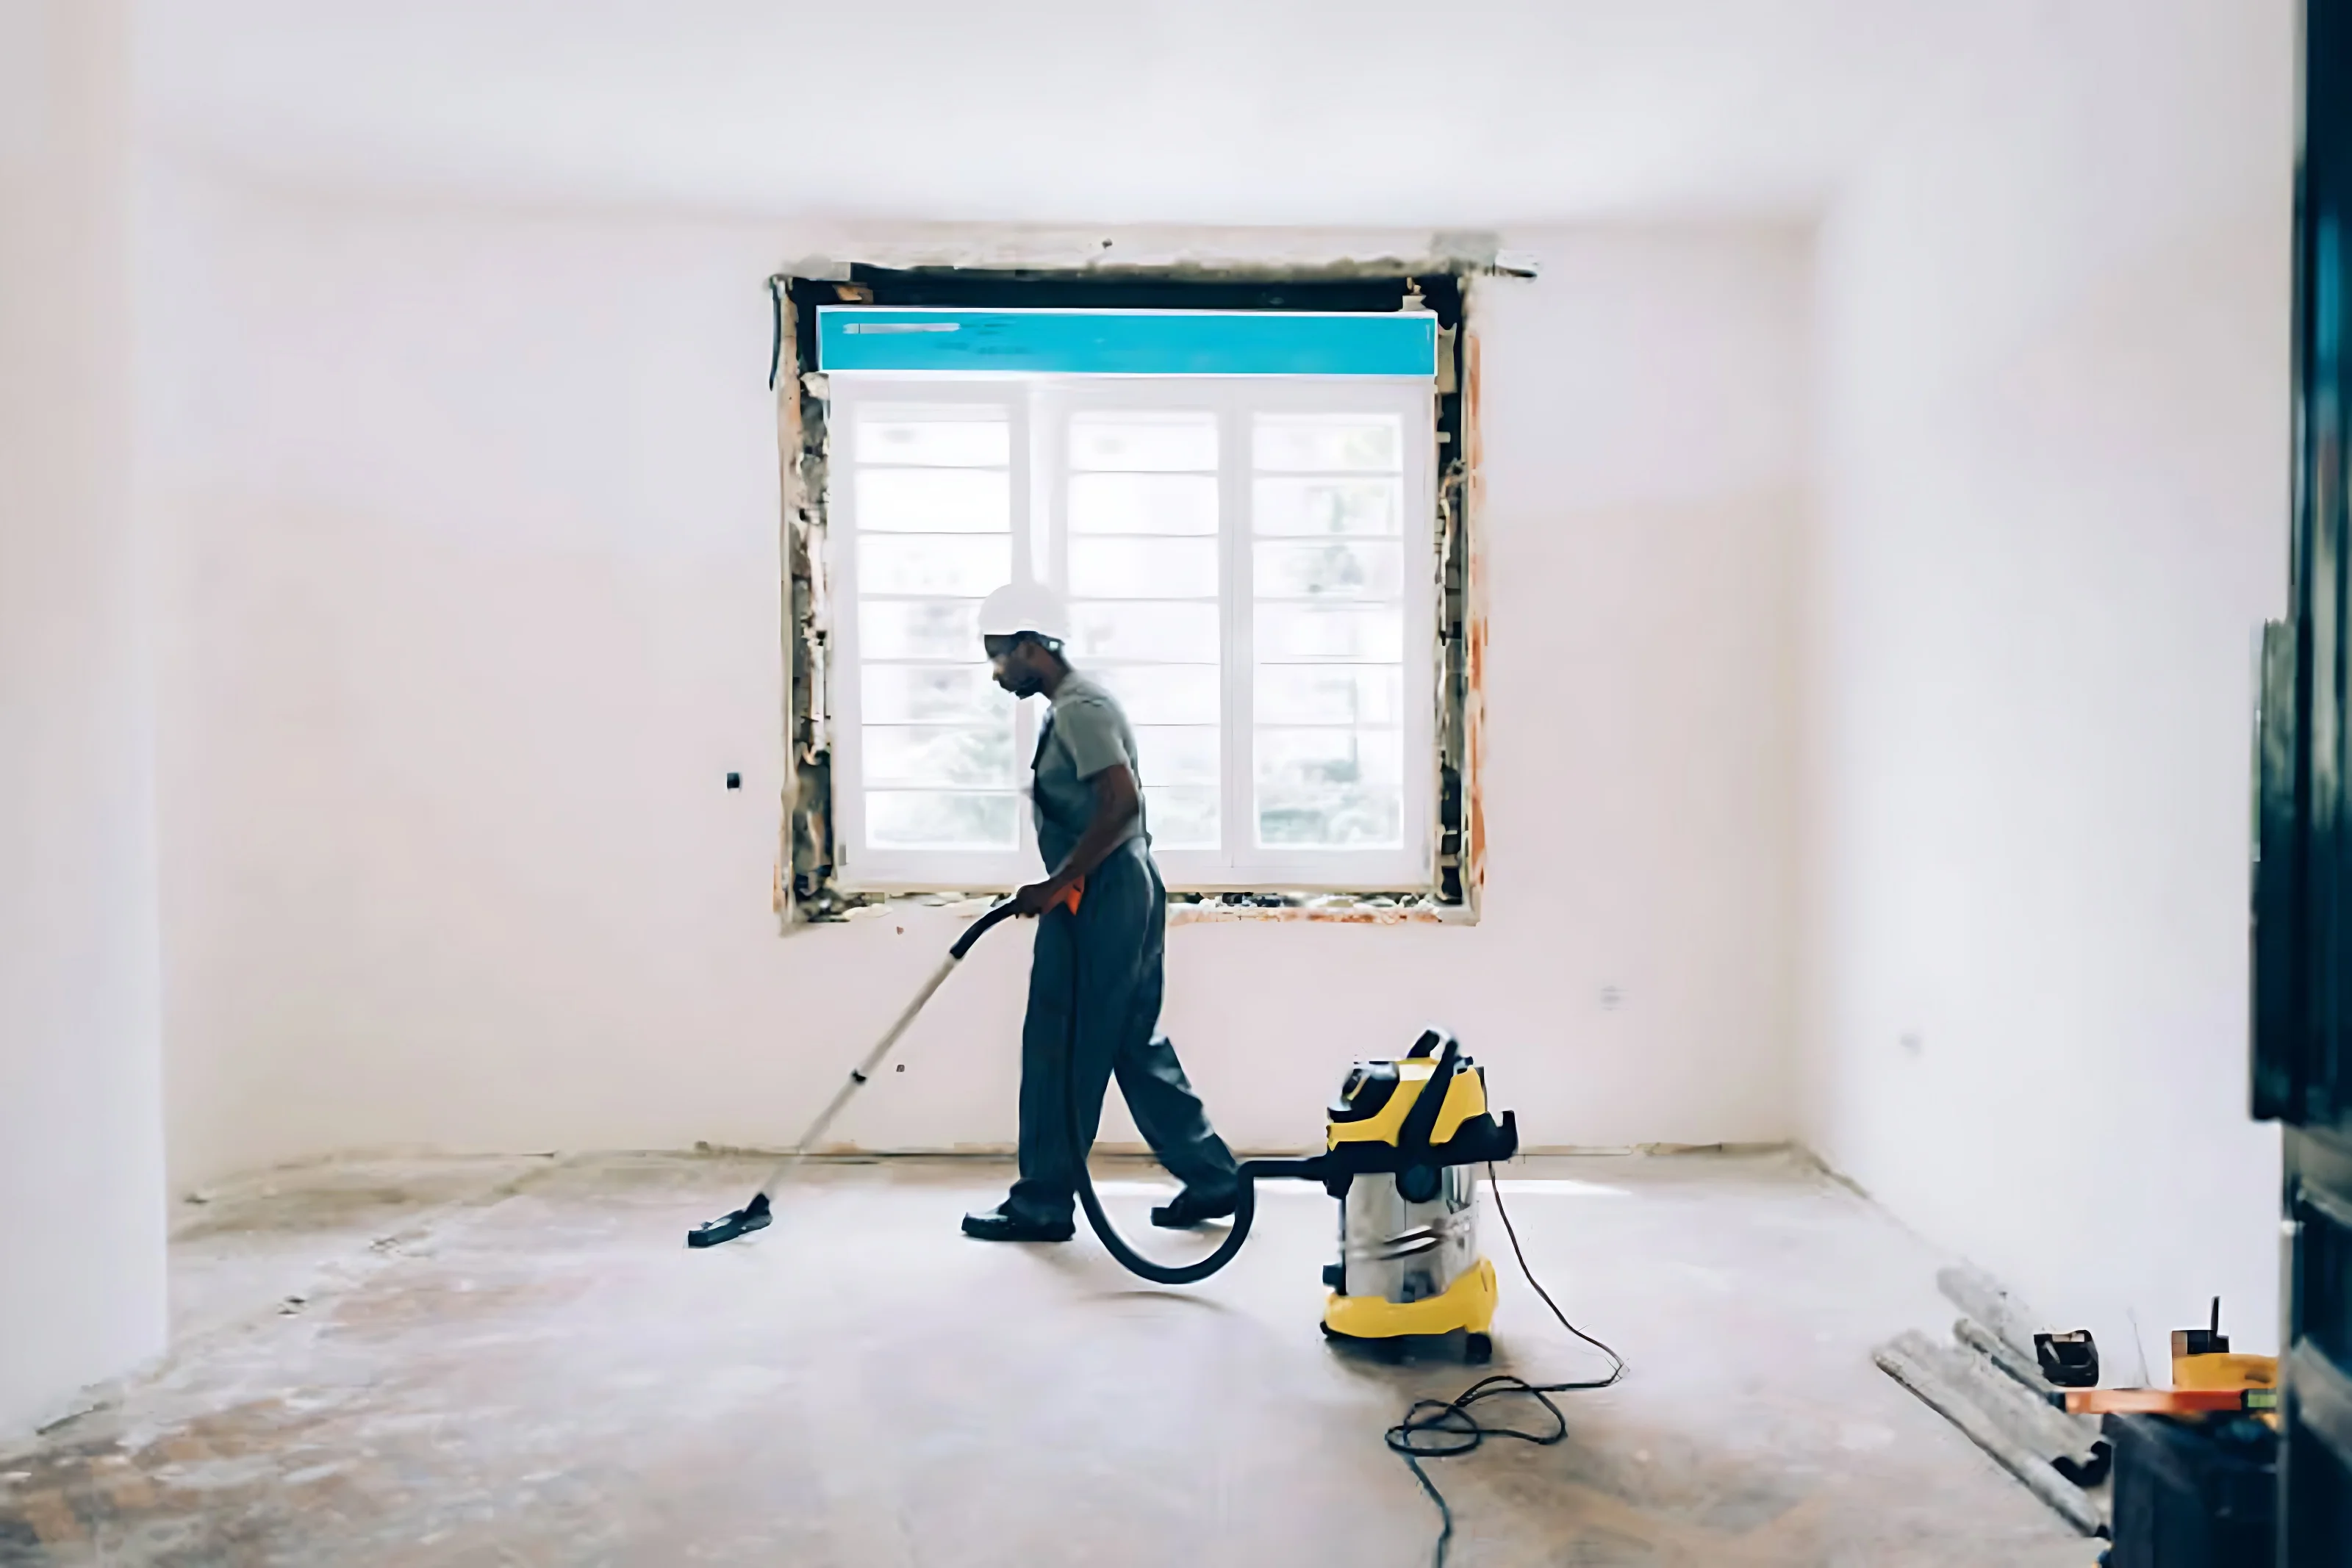 Man Cleaning floor after recent building constructions